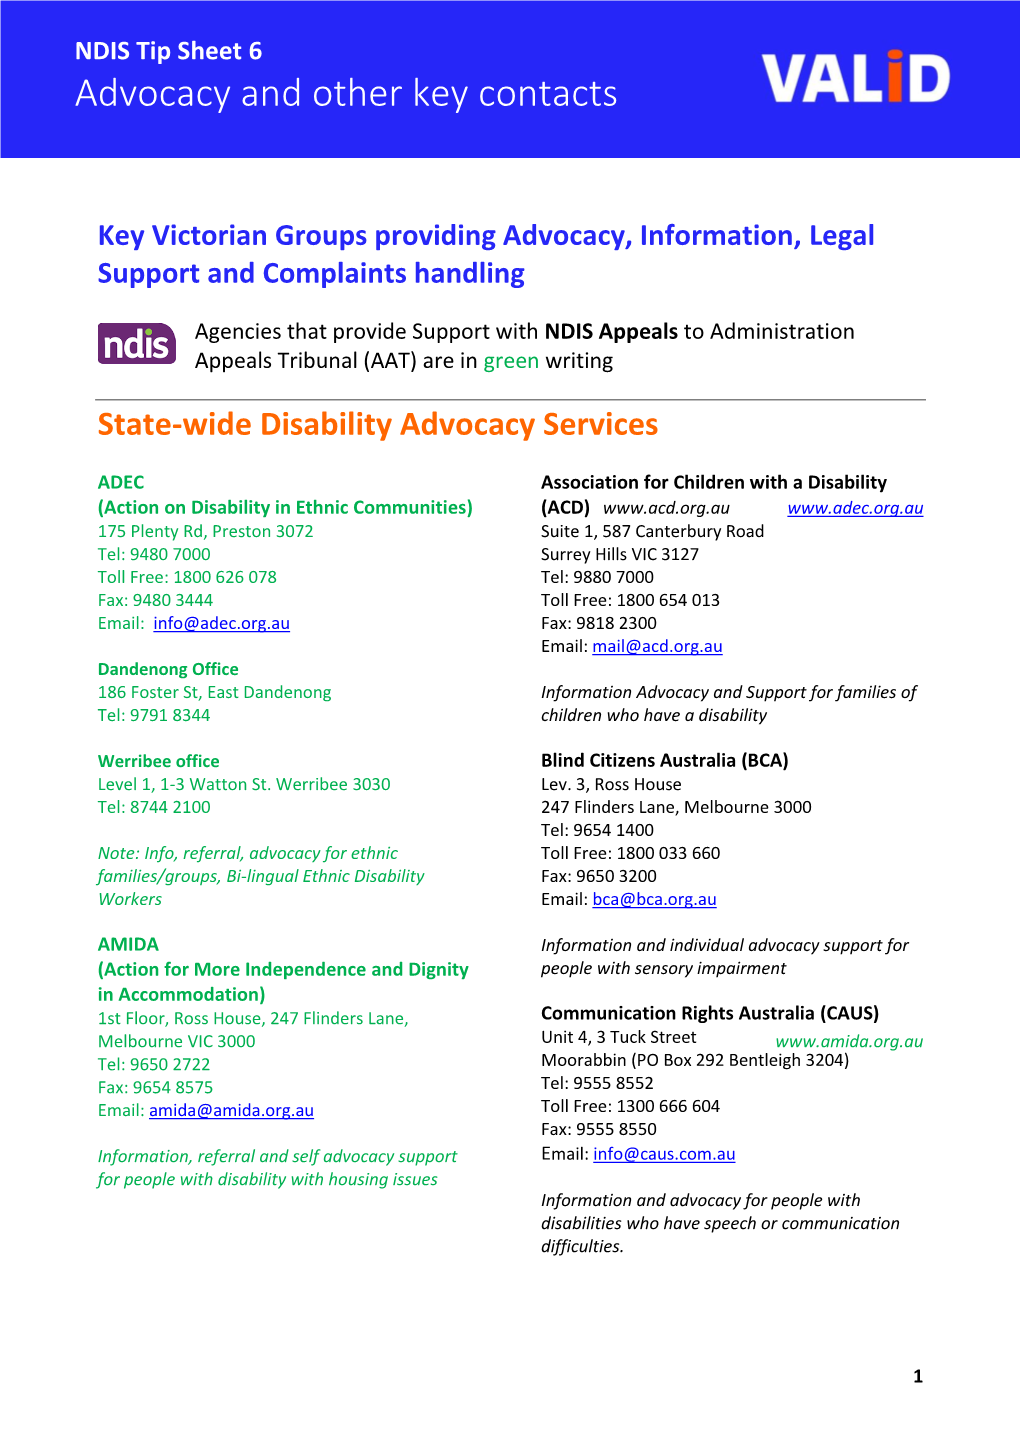 Advocacy and Other Key Contacts